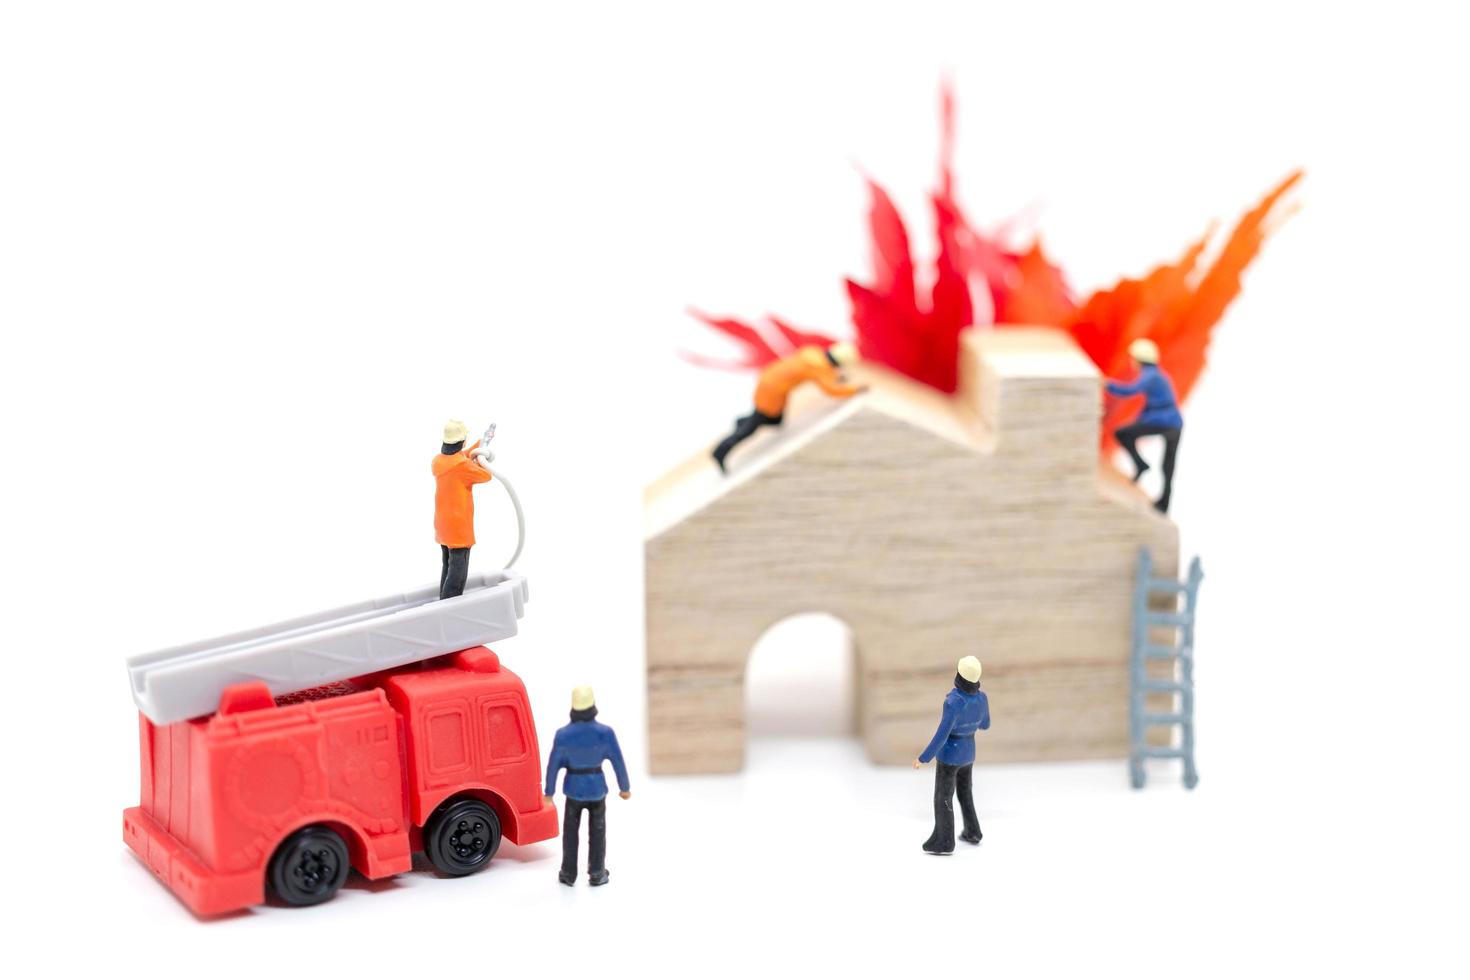 Miniature firefighters taking care of a fire emergency at a wooden house photo